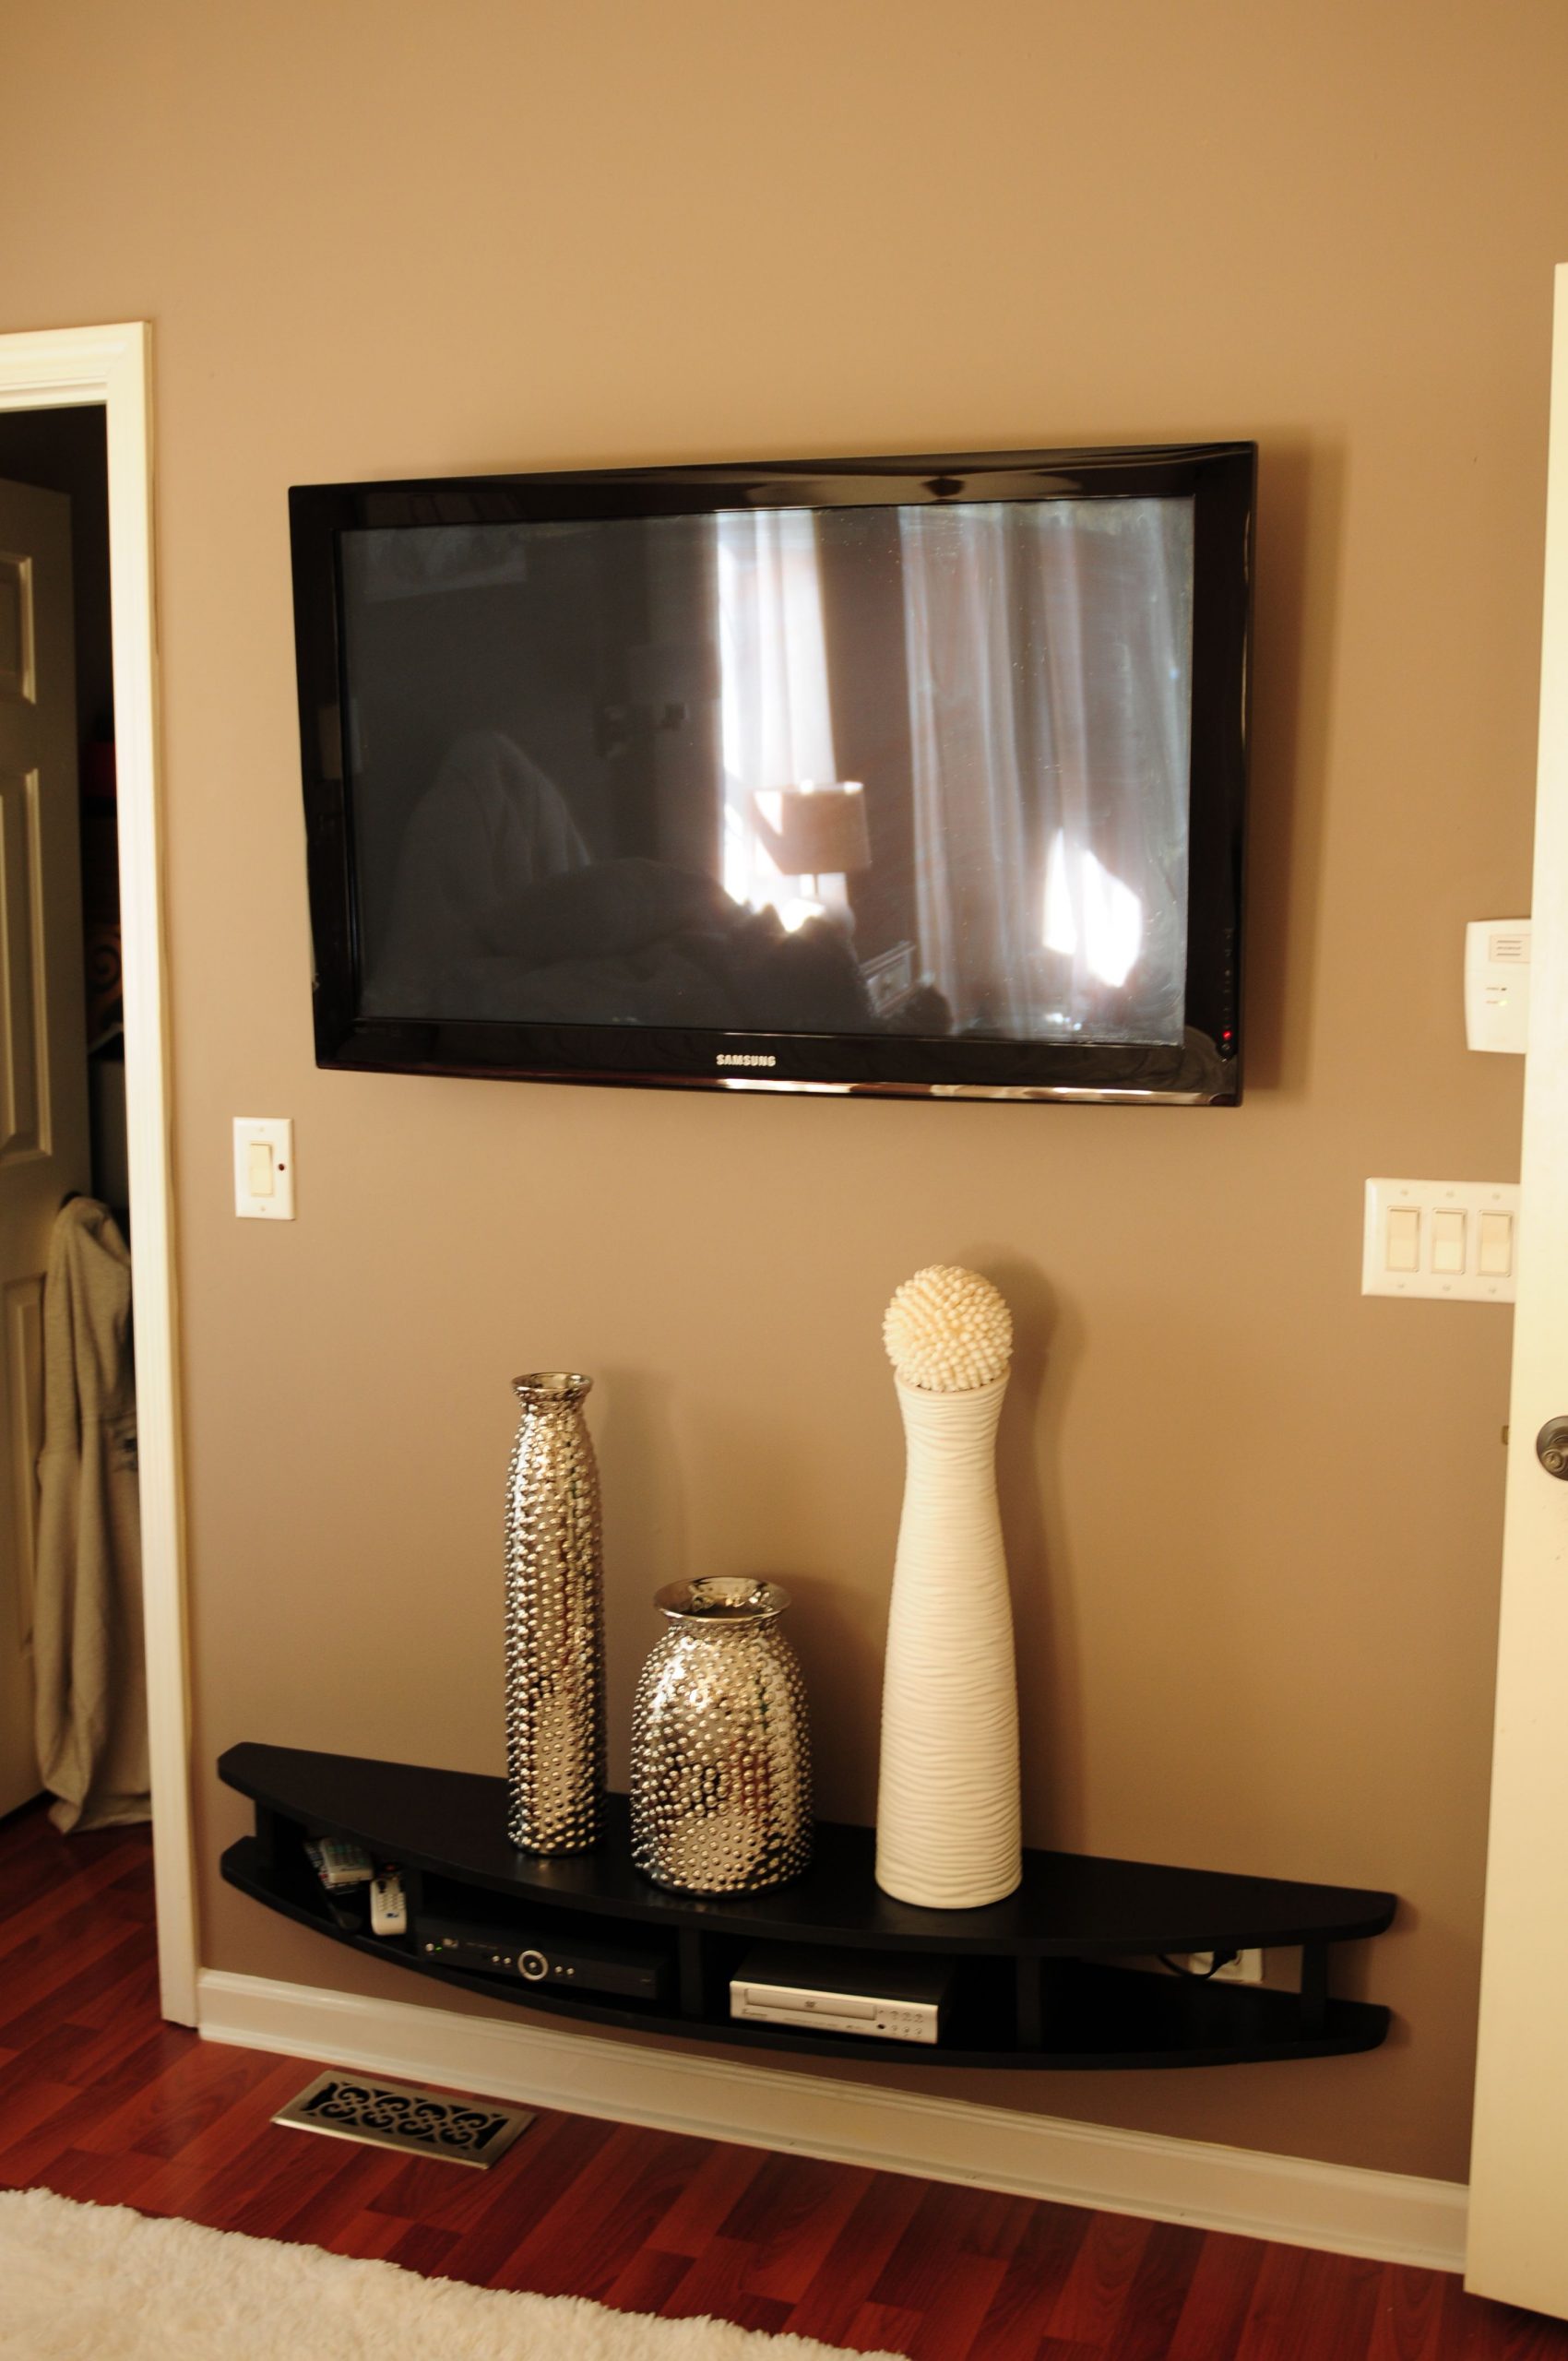 Hubby built modern shelves to wall mount under tv. He is so smart ...